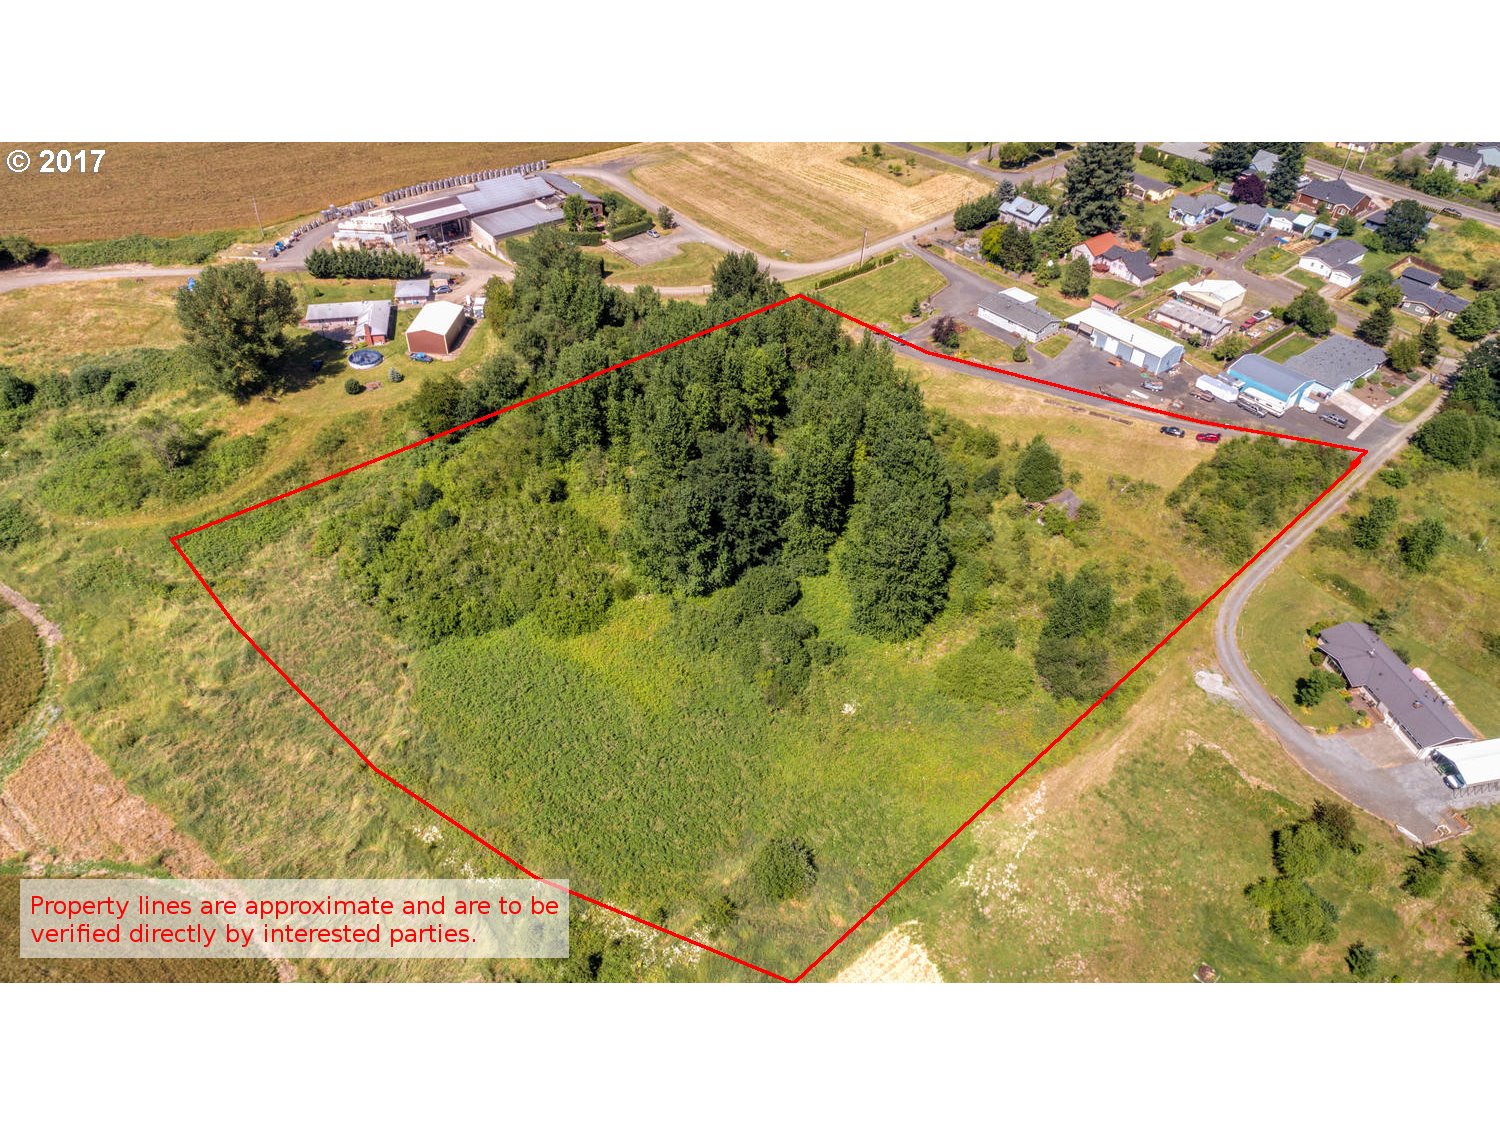 the Allegiant Realty Group - for sale 5 acres Carlton, Oregon by David Antinucci